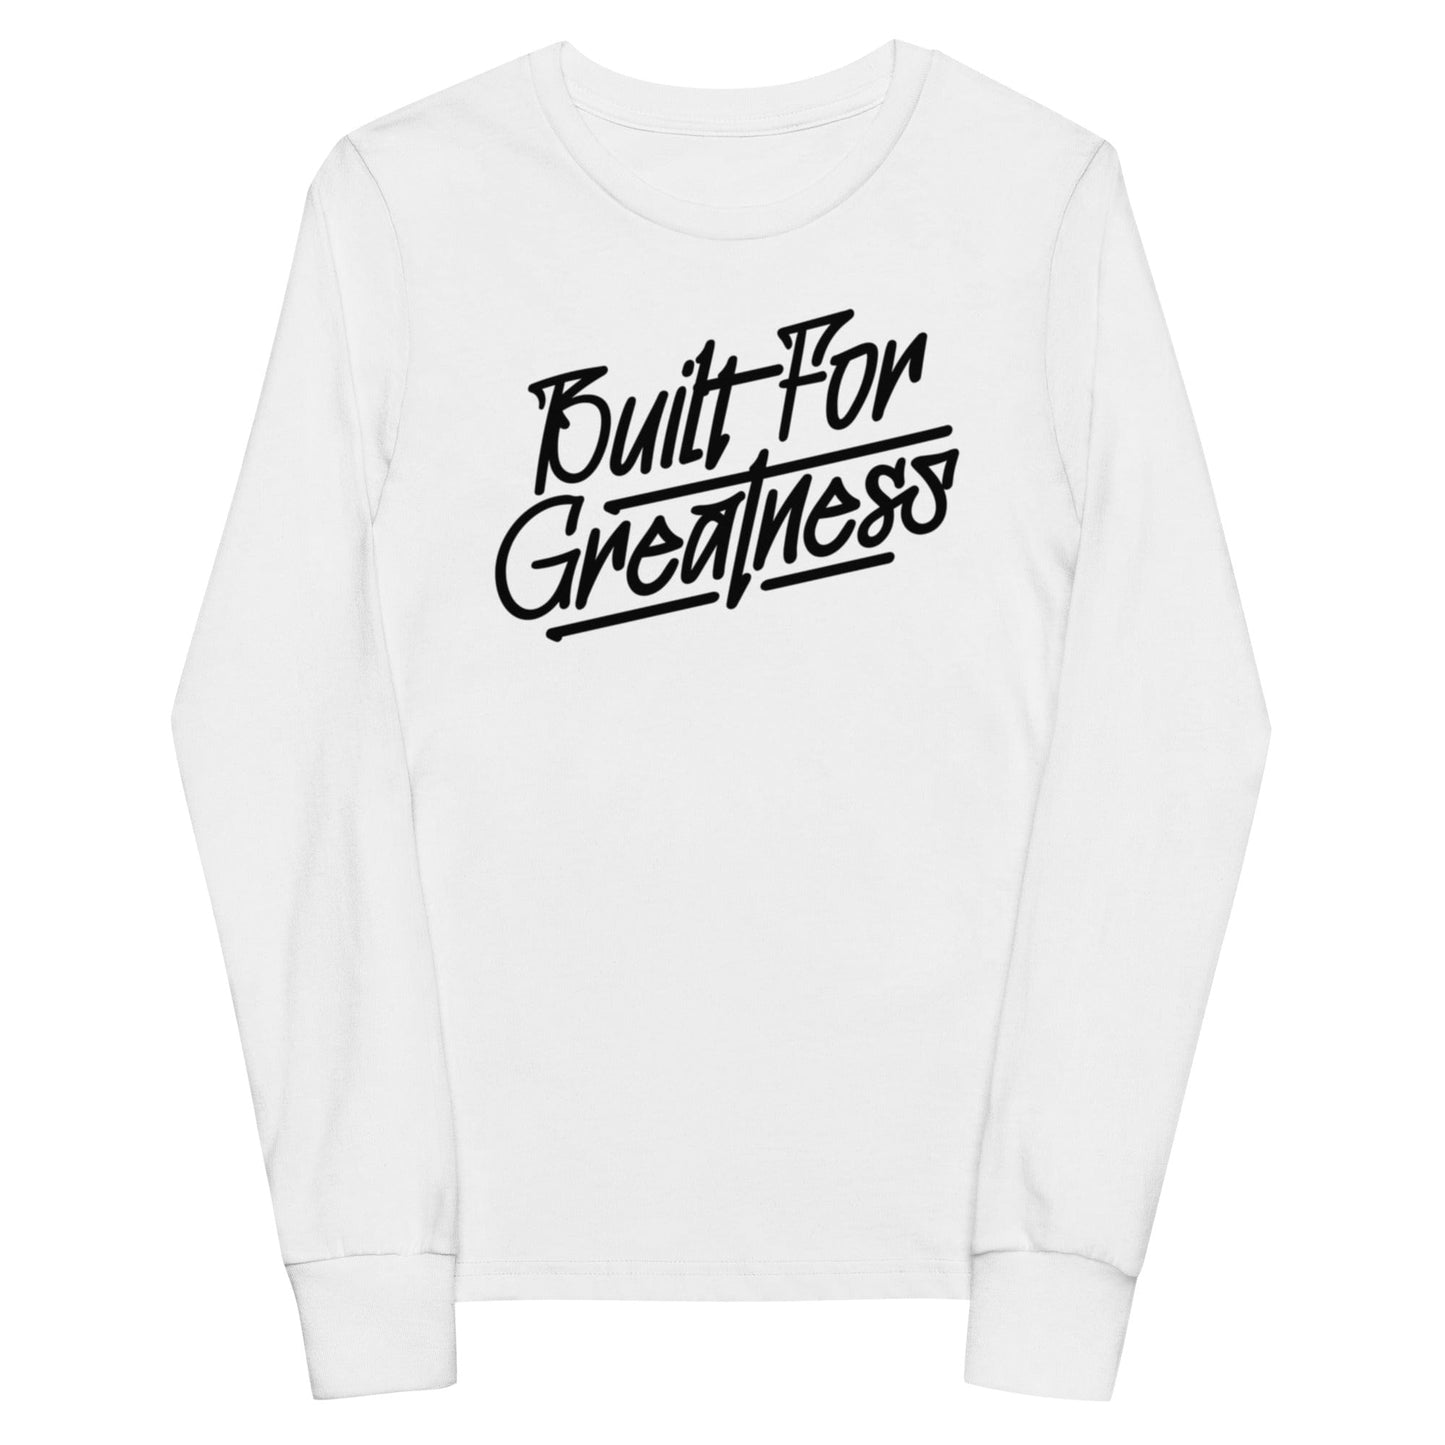 Built For Greatness - Youth Long Sleeve